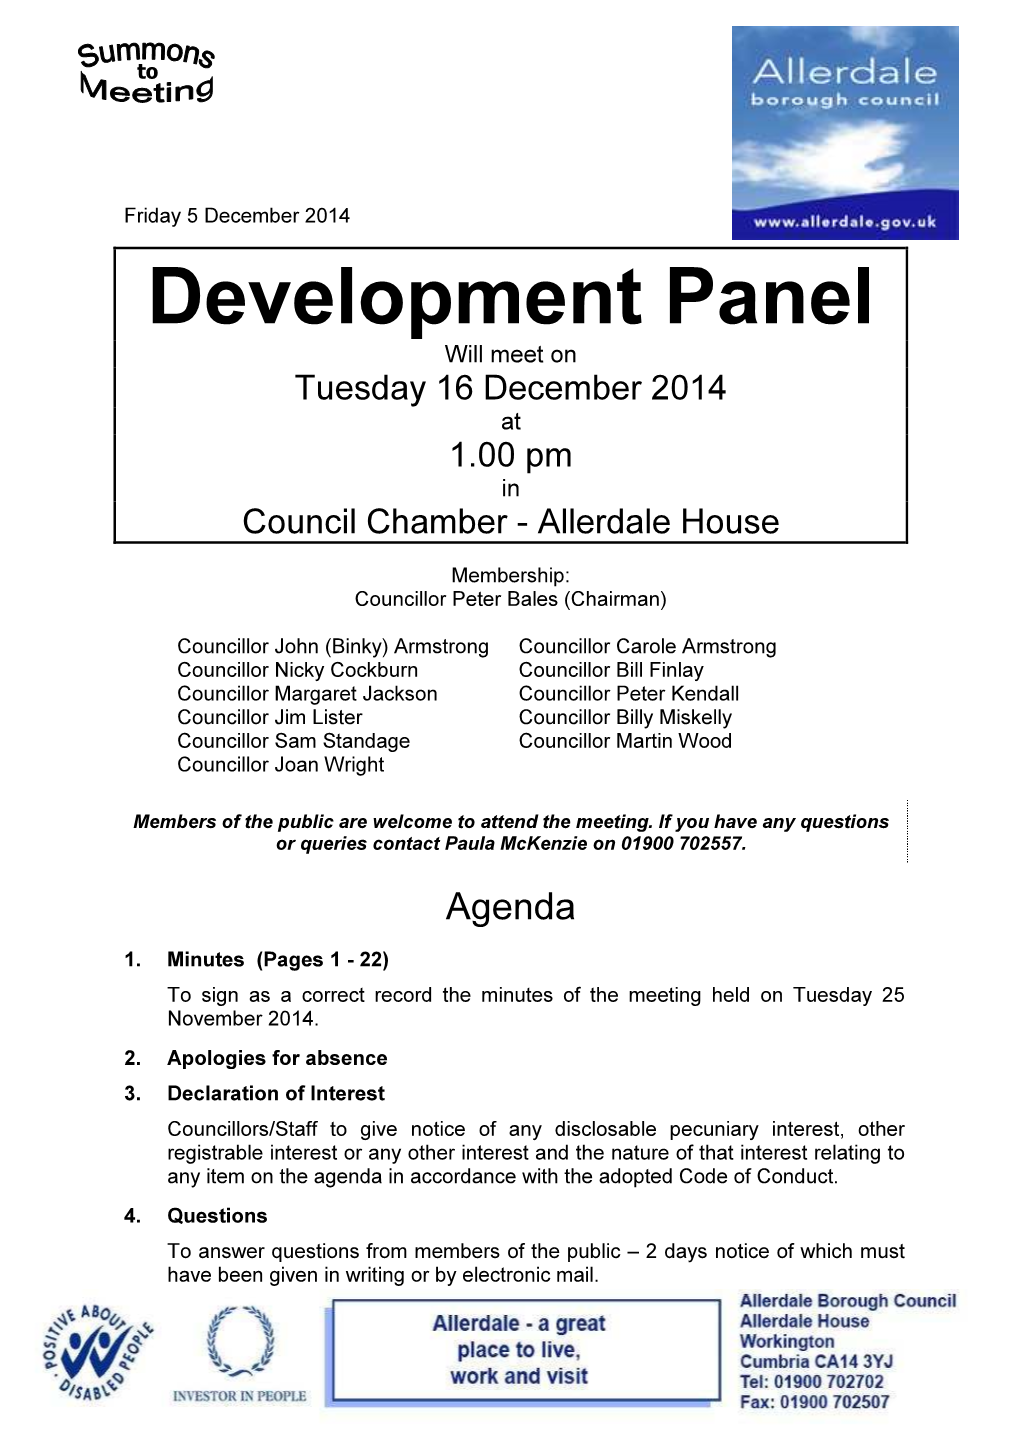 Development Panel Will Meet on Tuesday 16 December 2014 at 1.00 Pm in Council Chamber - Allerdale House